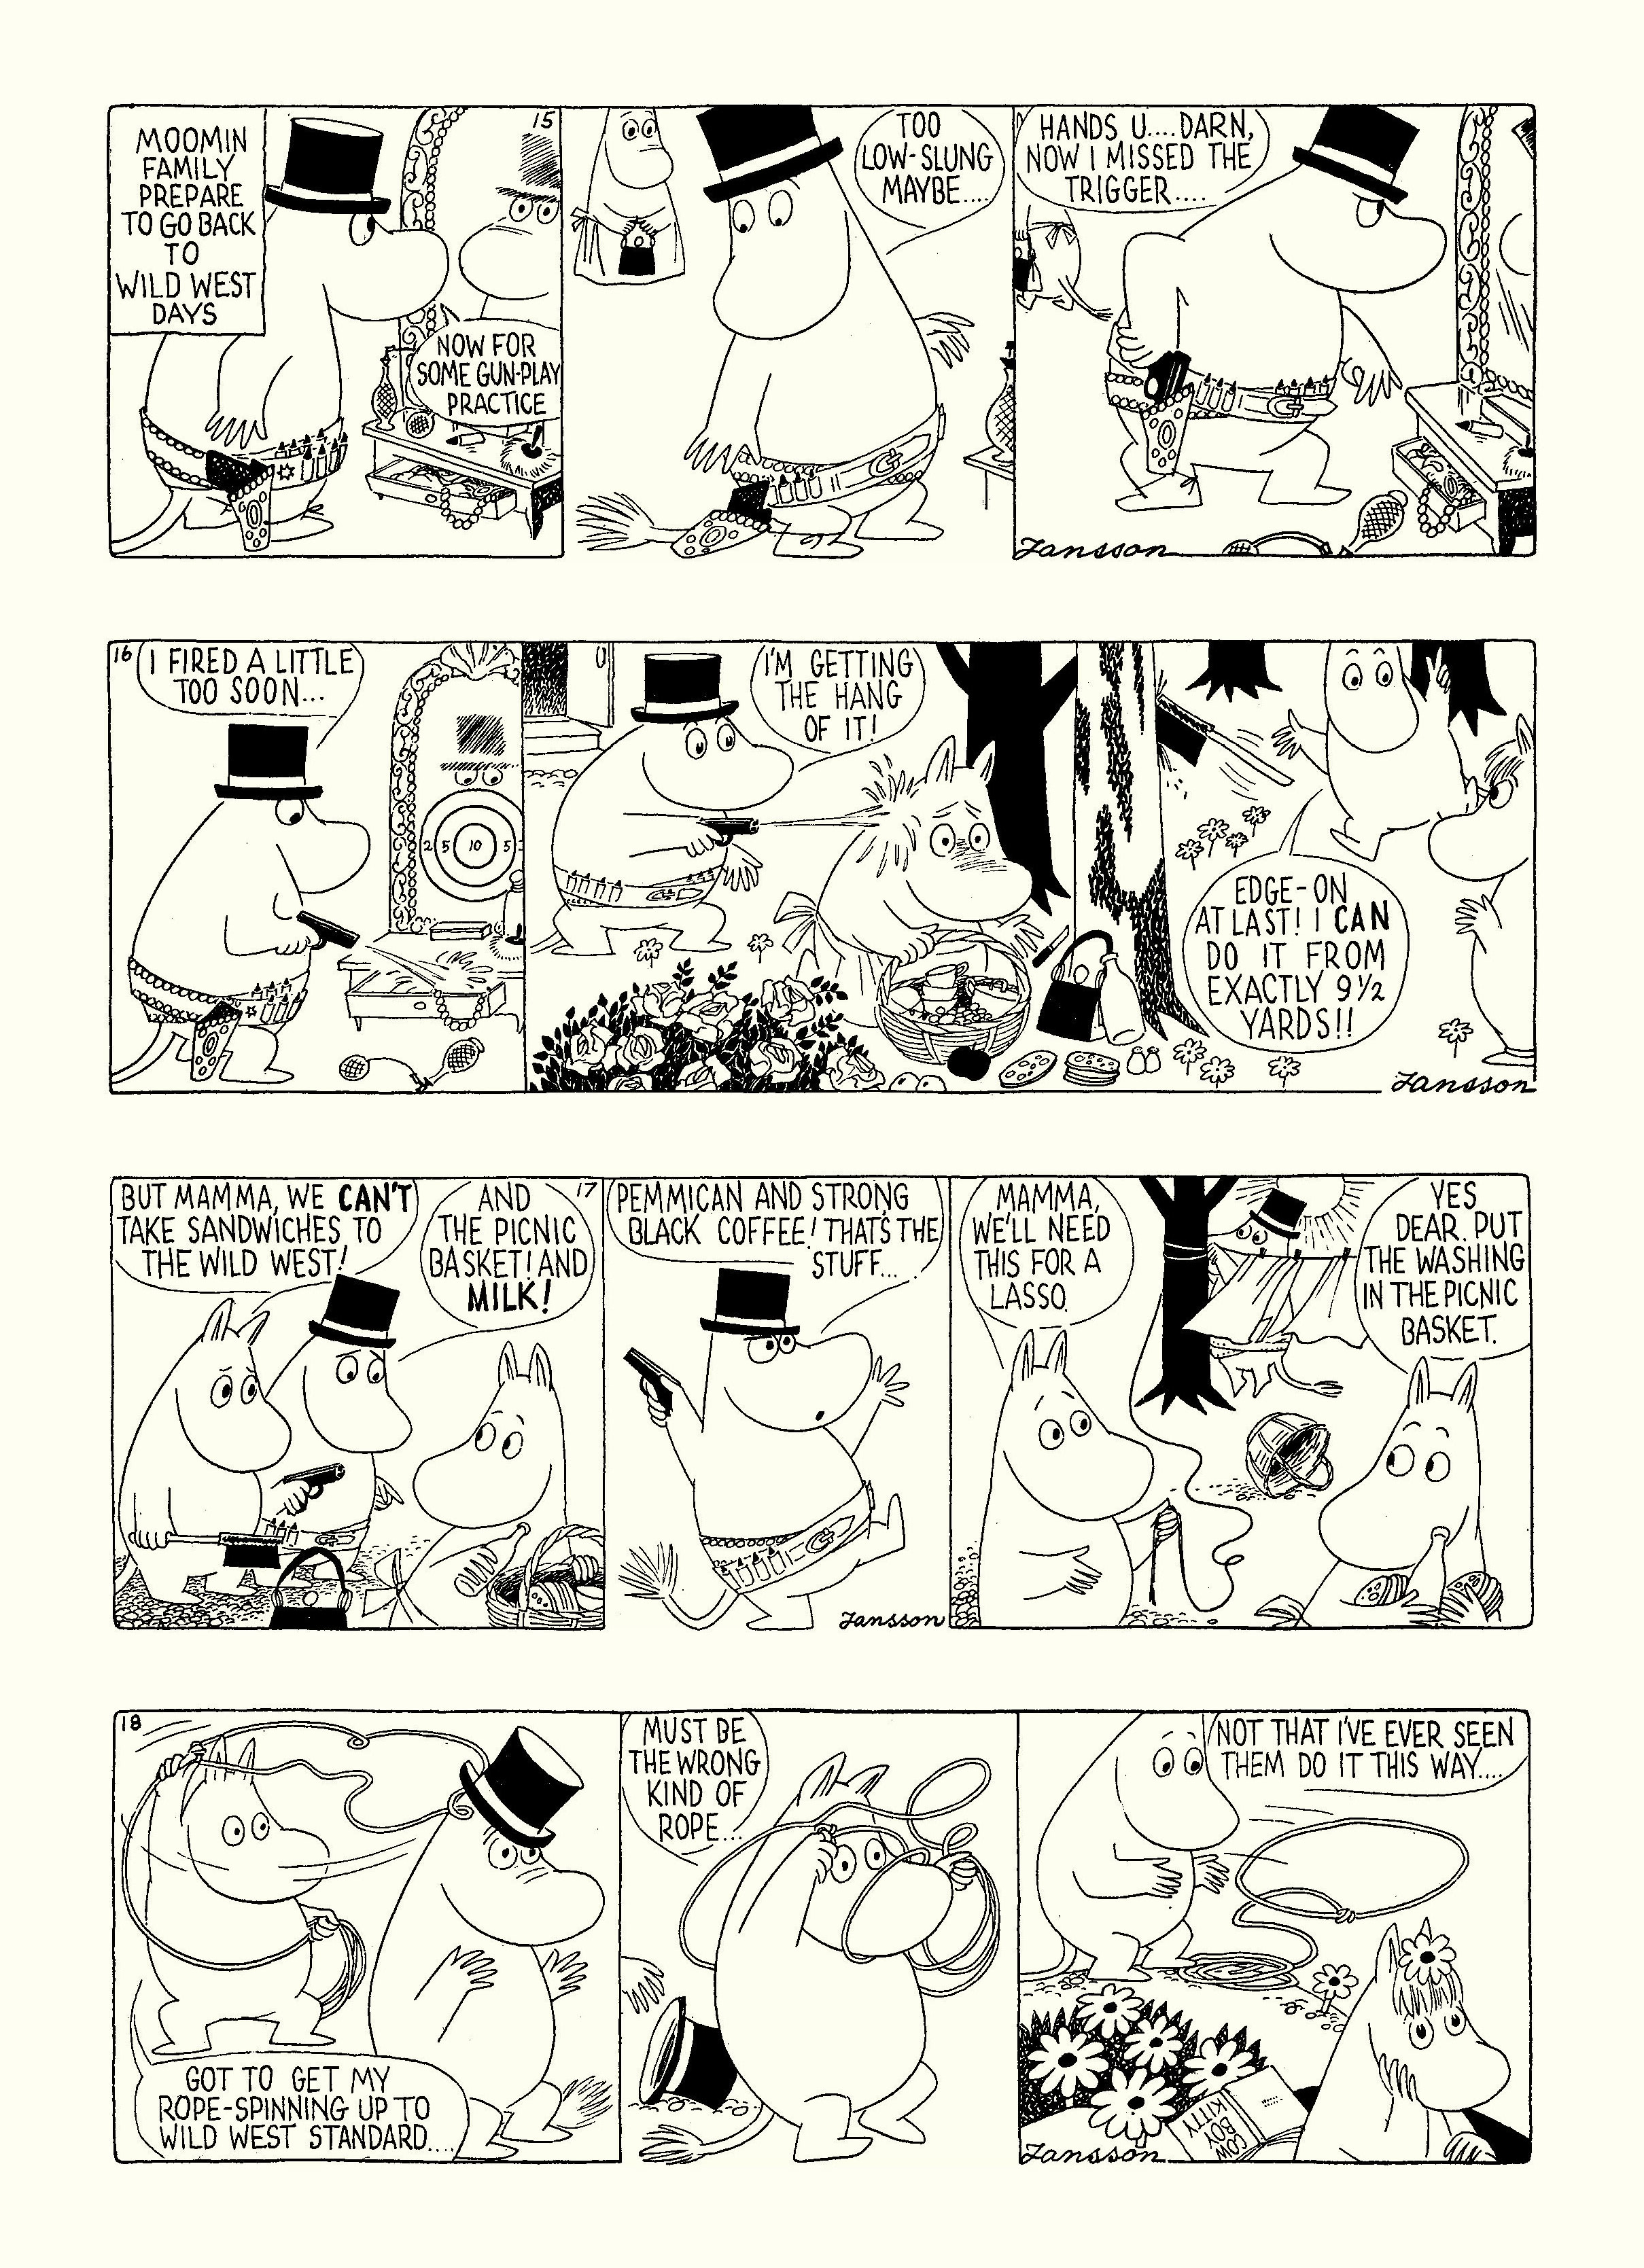 Read online Moomin: The Complete Tove Jansson Comic Strip comic -  Issue # TPB 4 - 10